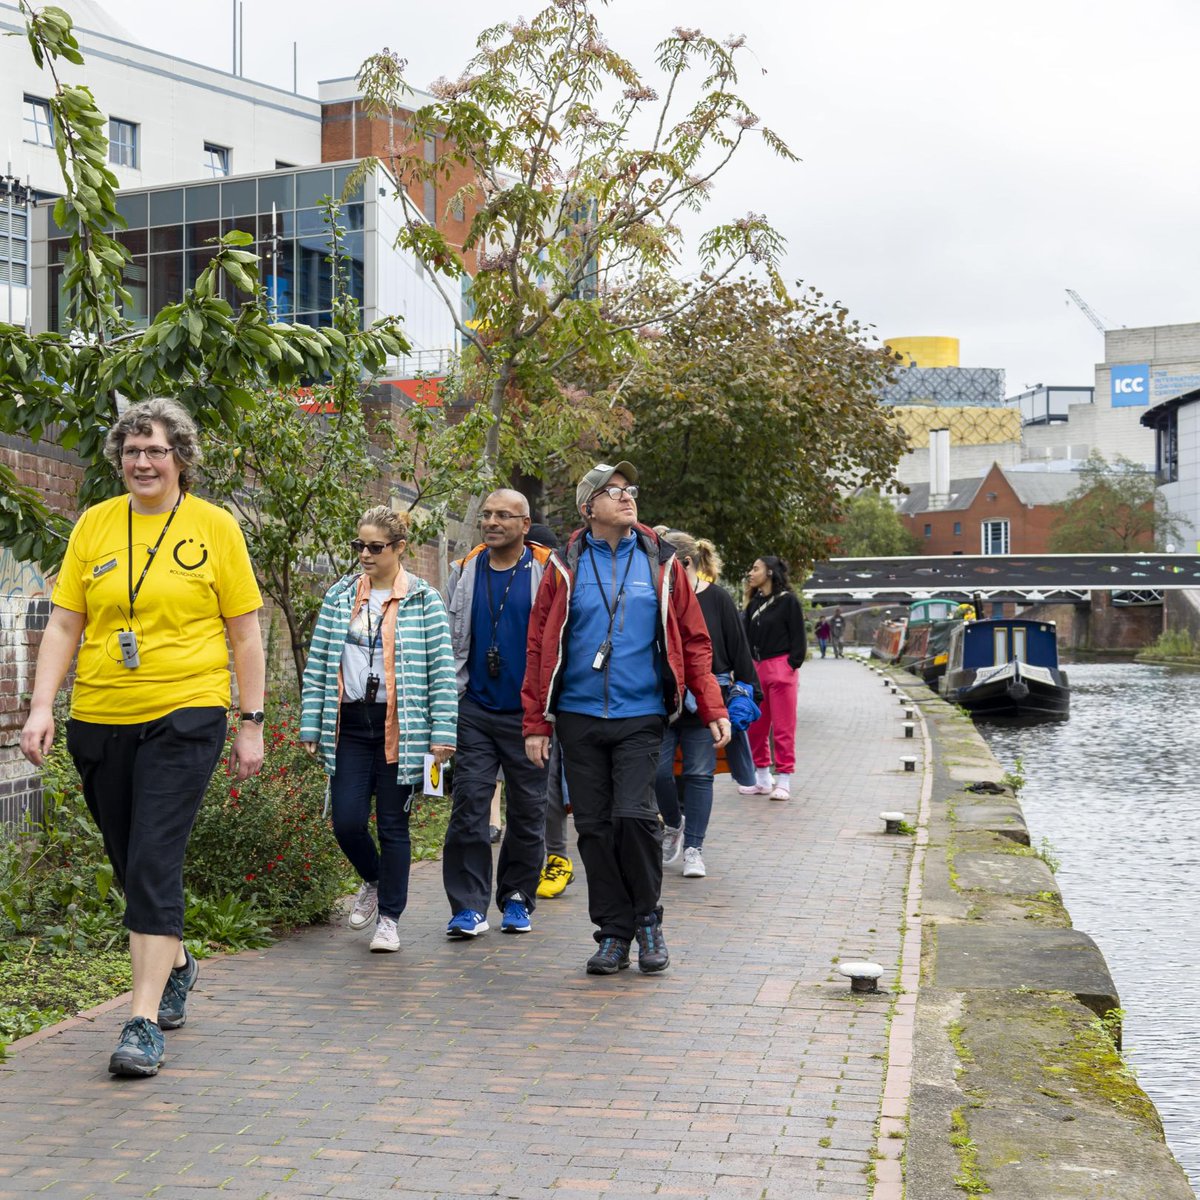 A present from us to you! Join us on Sunday 12th May for a walking tour of Birmingham's canal loops for just £5. This is the only time this tour will be this price all year, join us as part of our Birthday Weekend! Book here: roundhousebirmingham.org.uk/product/birthd… #SeeTheCityDifferently